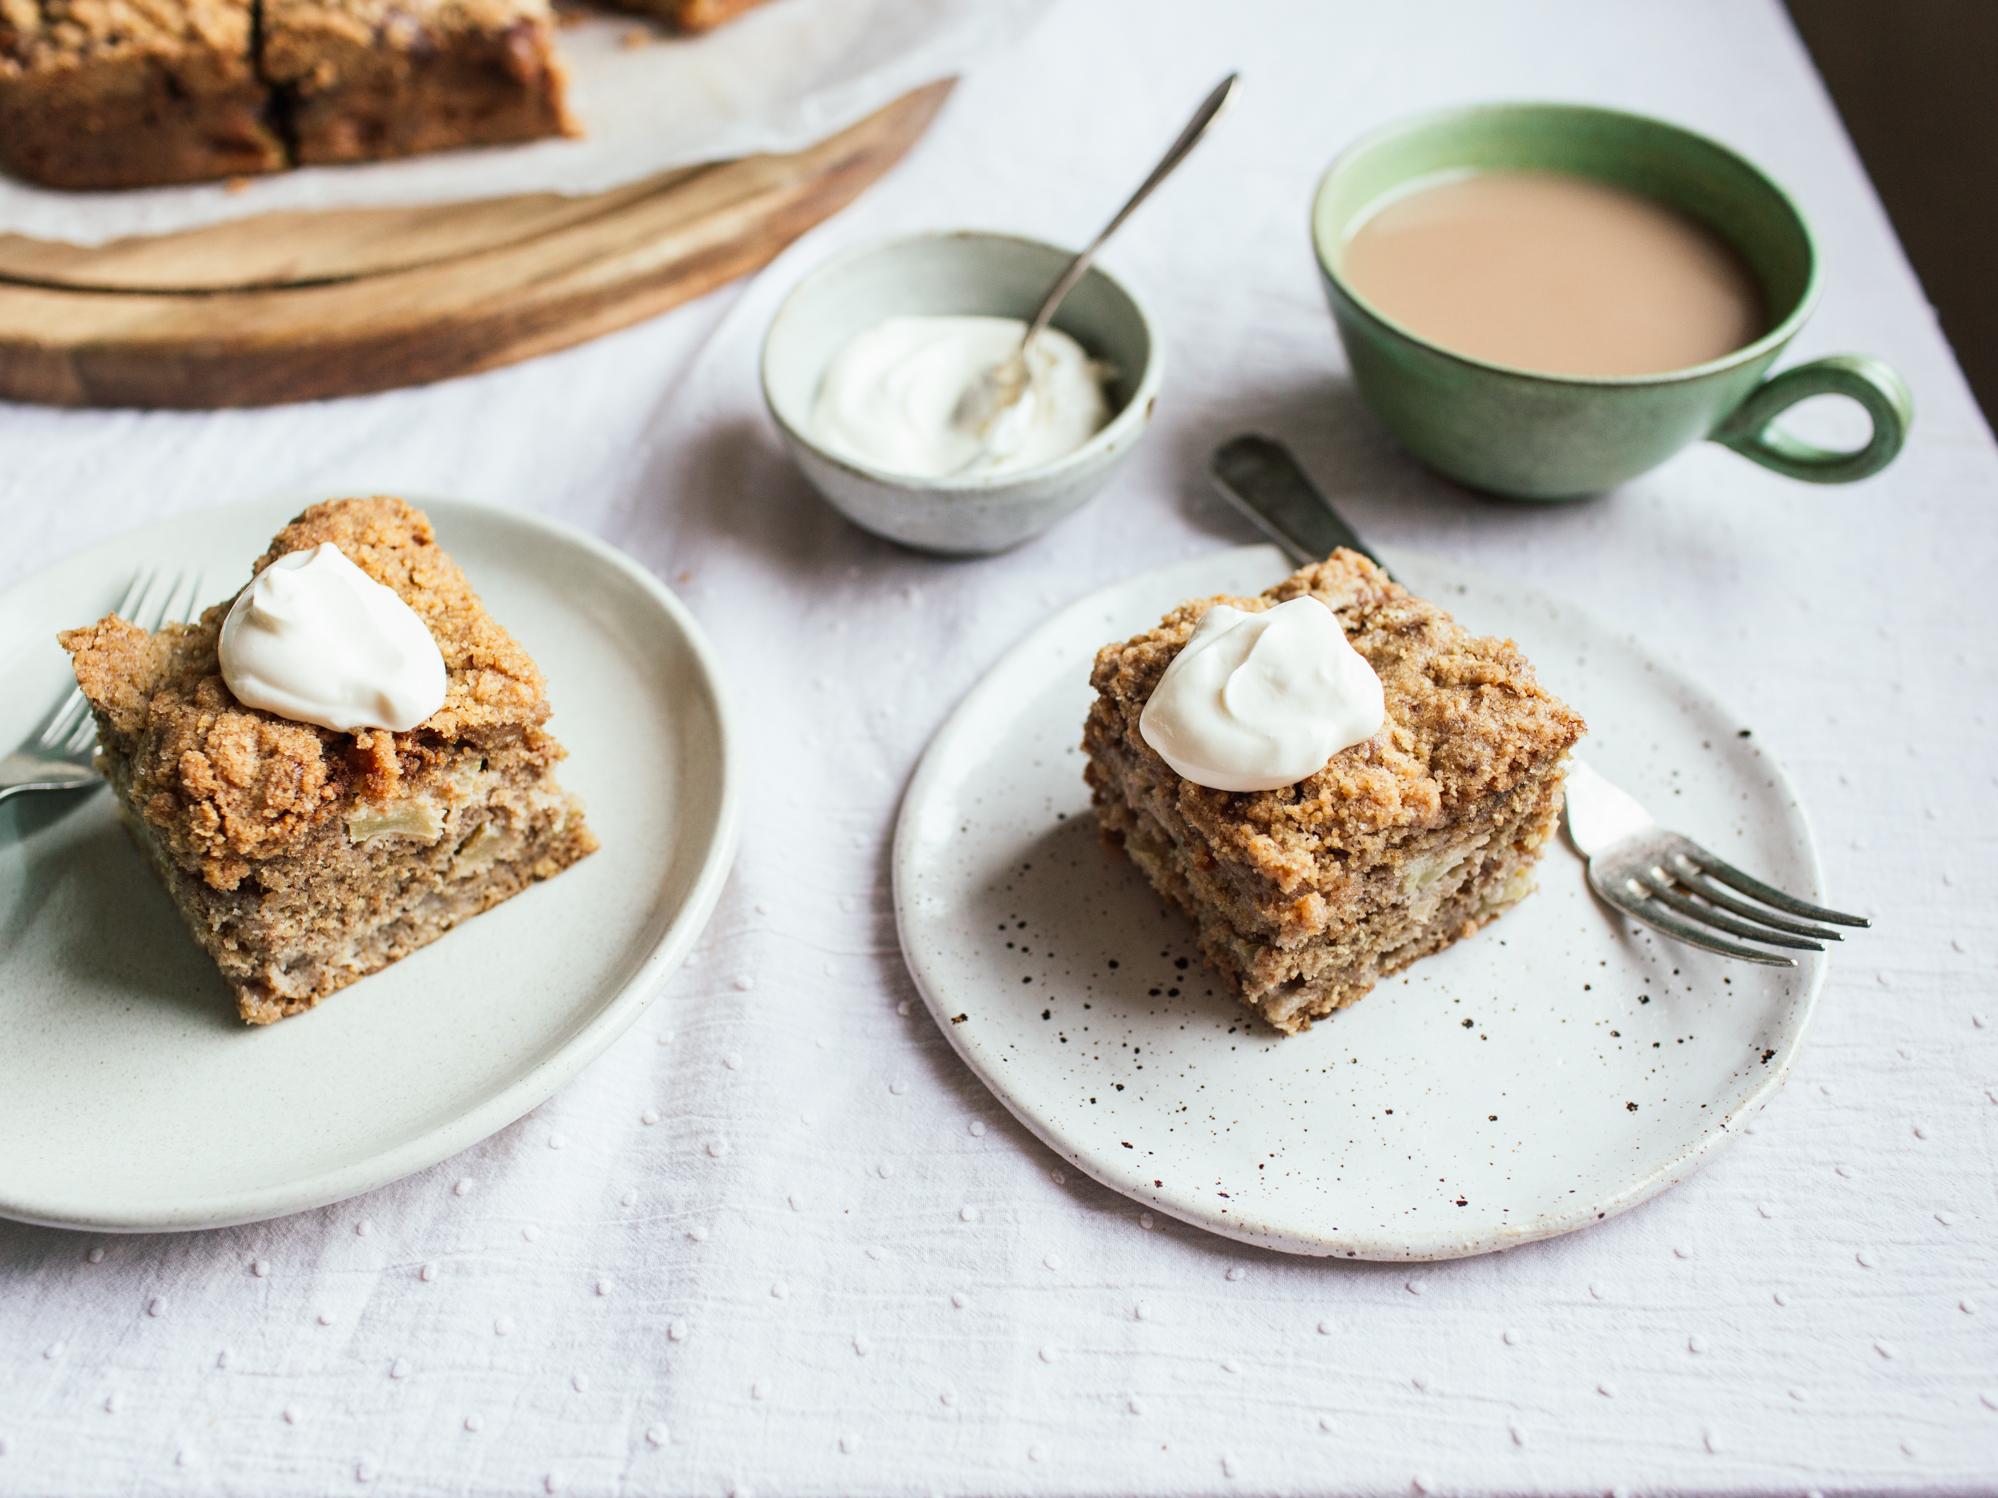 Delicious Apple Coffee Cake Recipe for Brunch!